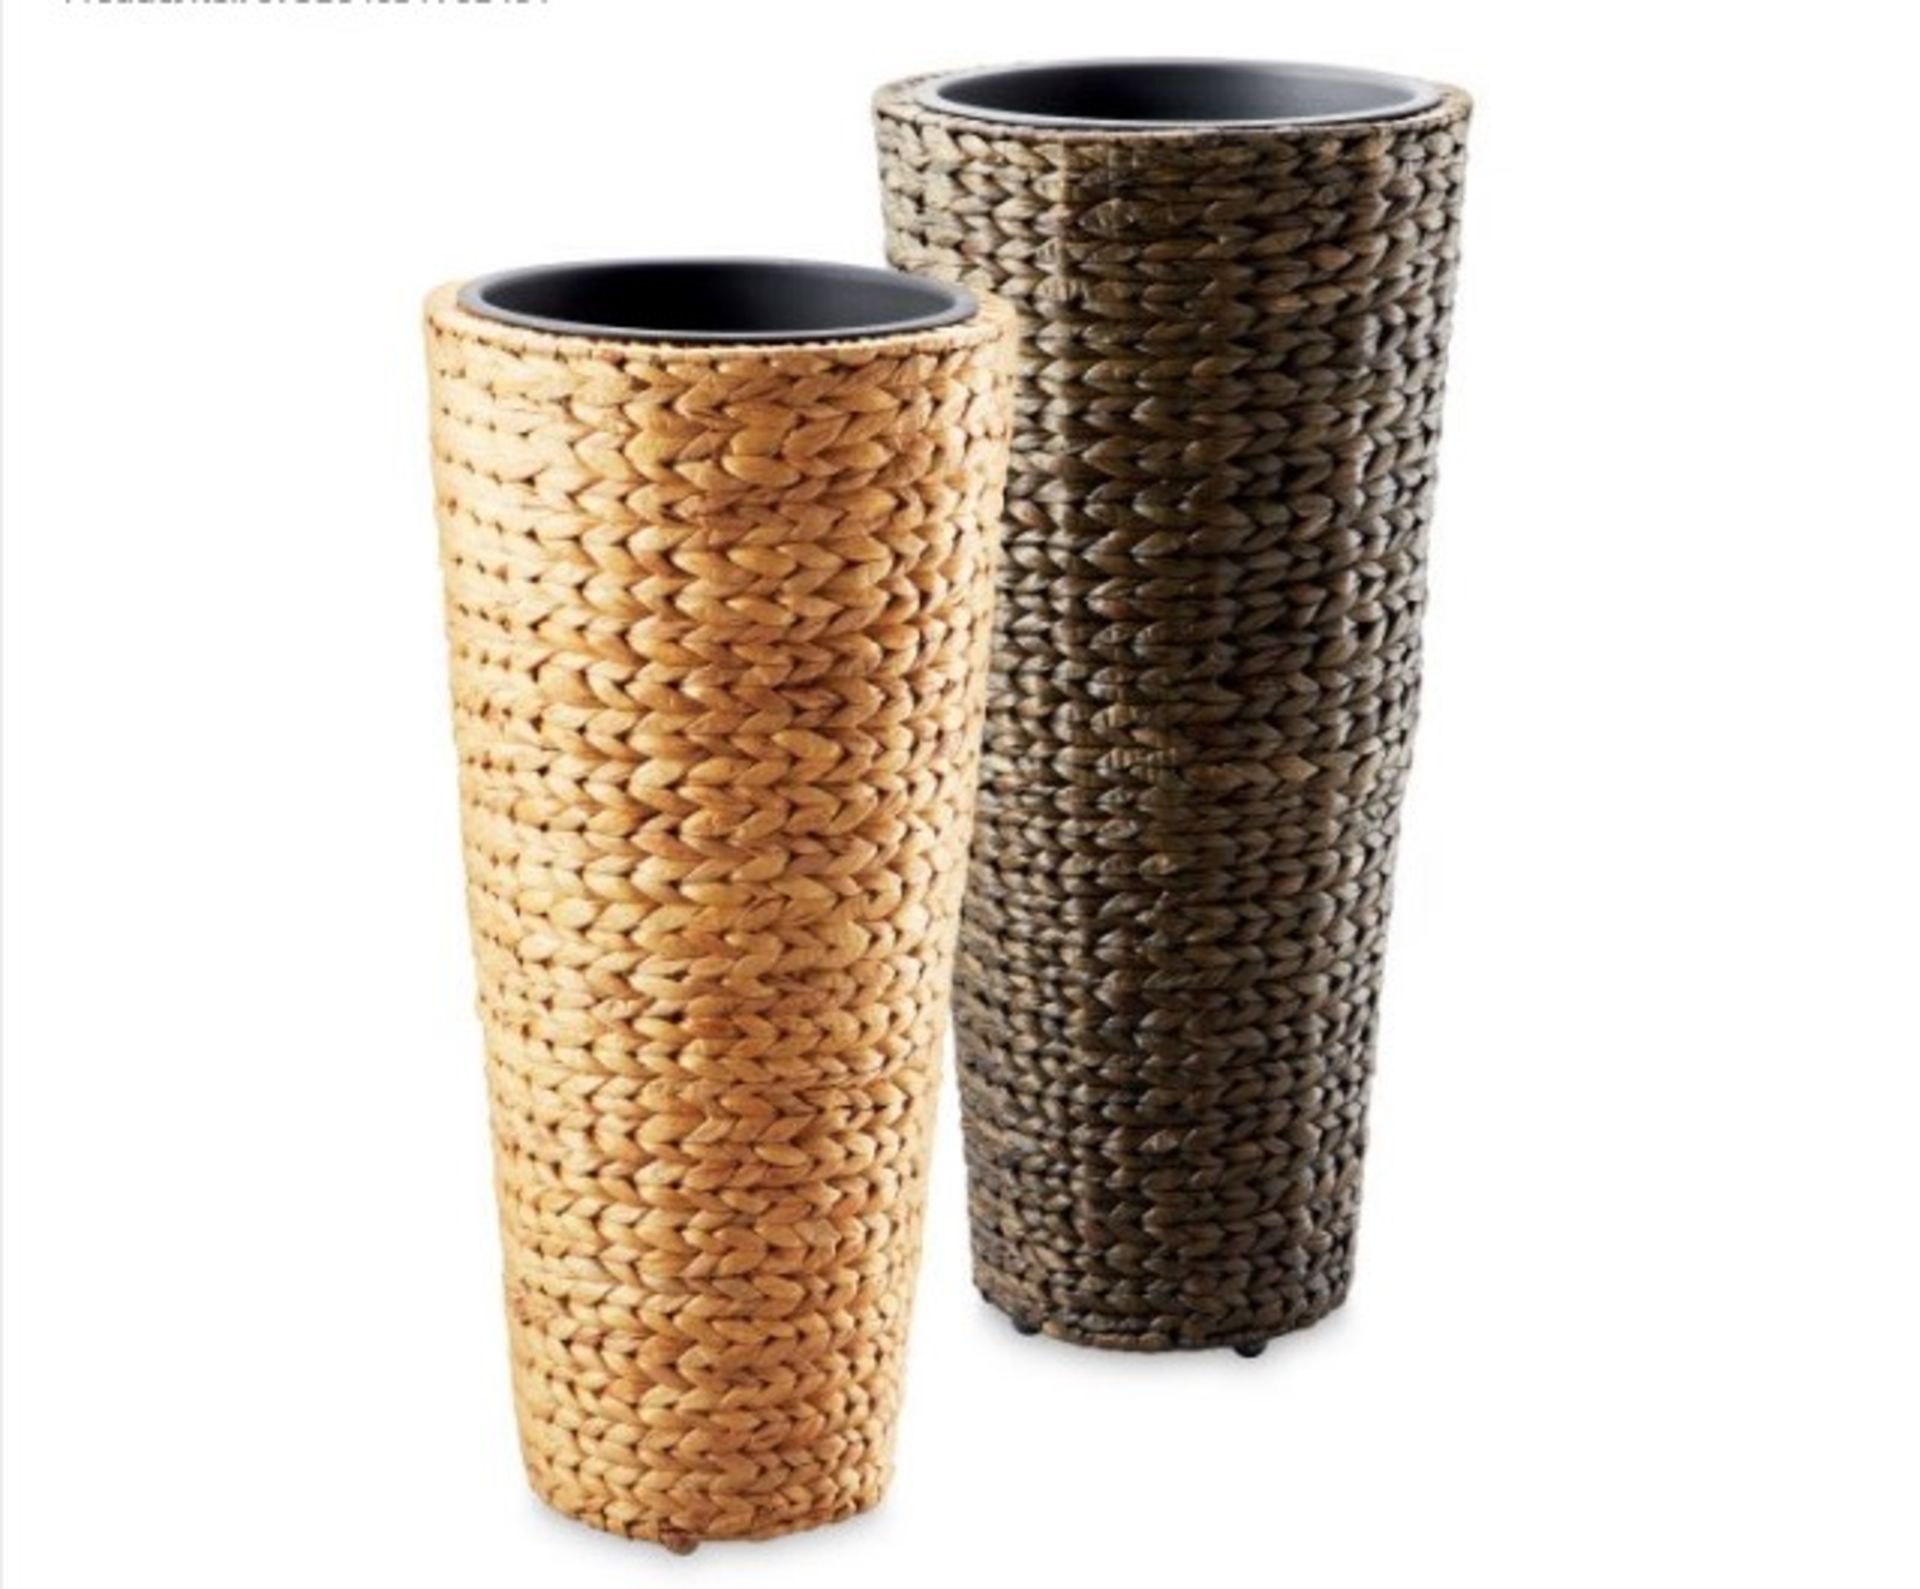 V Brand New 60cm Rattan Weave Ceramic Planter - With Removable Planting Bin - Feet for Floor - Image 2 of 3